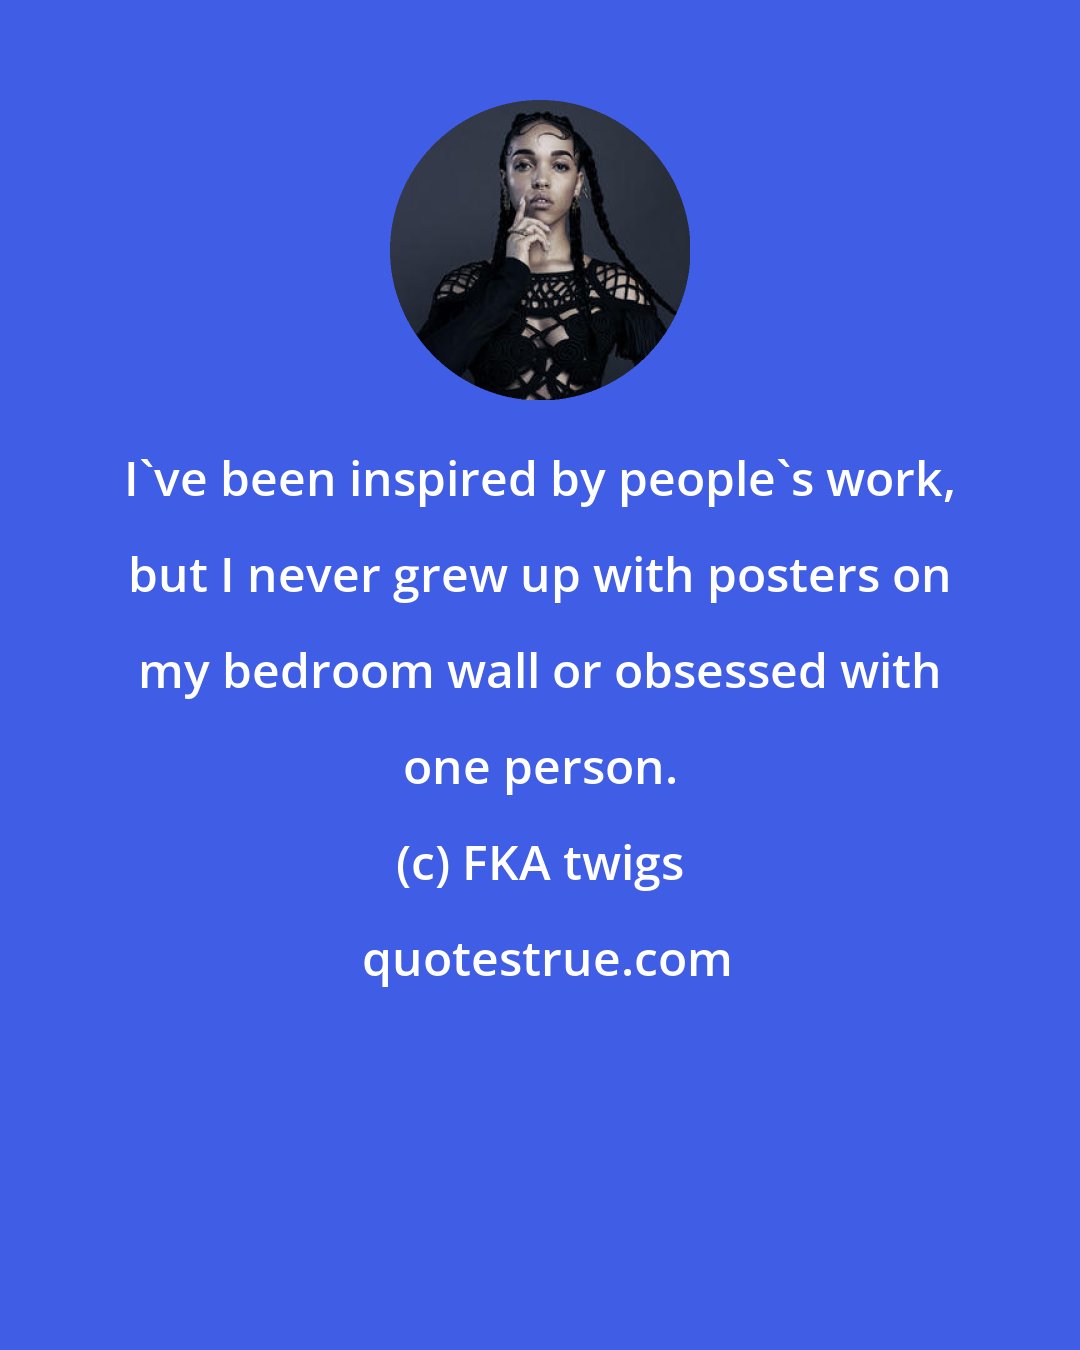 FKA twigs: I've been inspired by people's work, but I never grew up with posters on my bedroom wall or obsessed with one person.